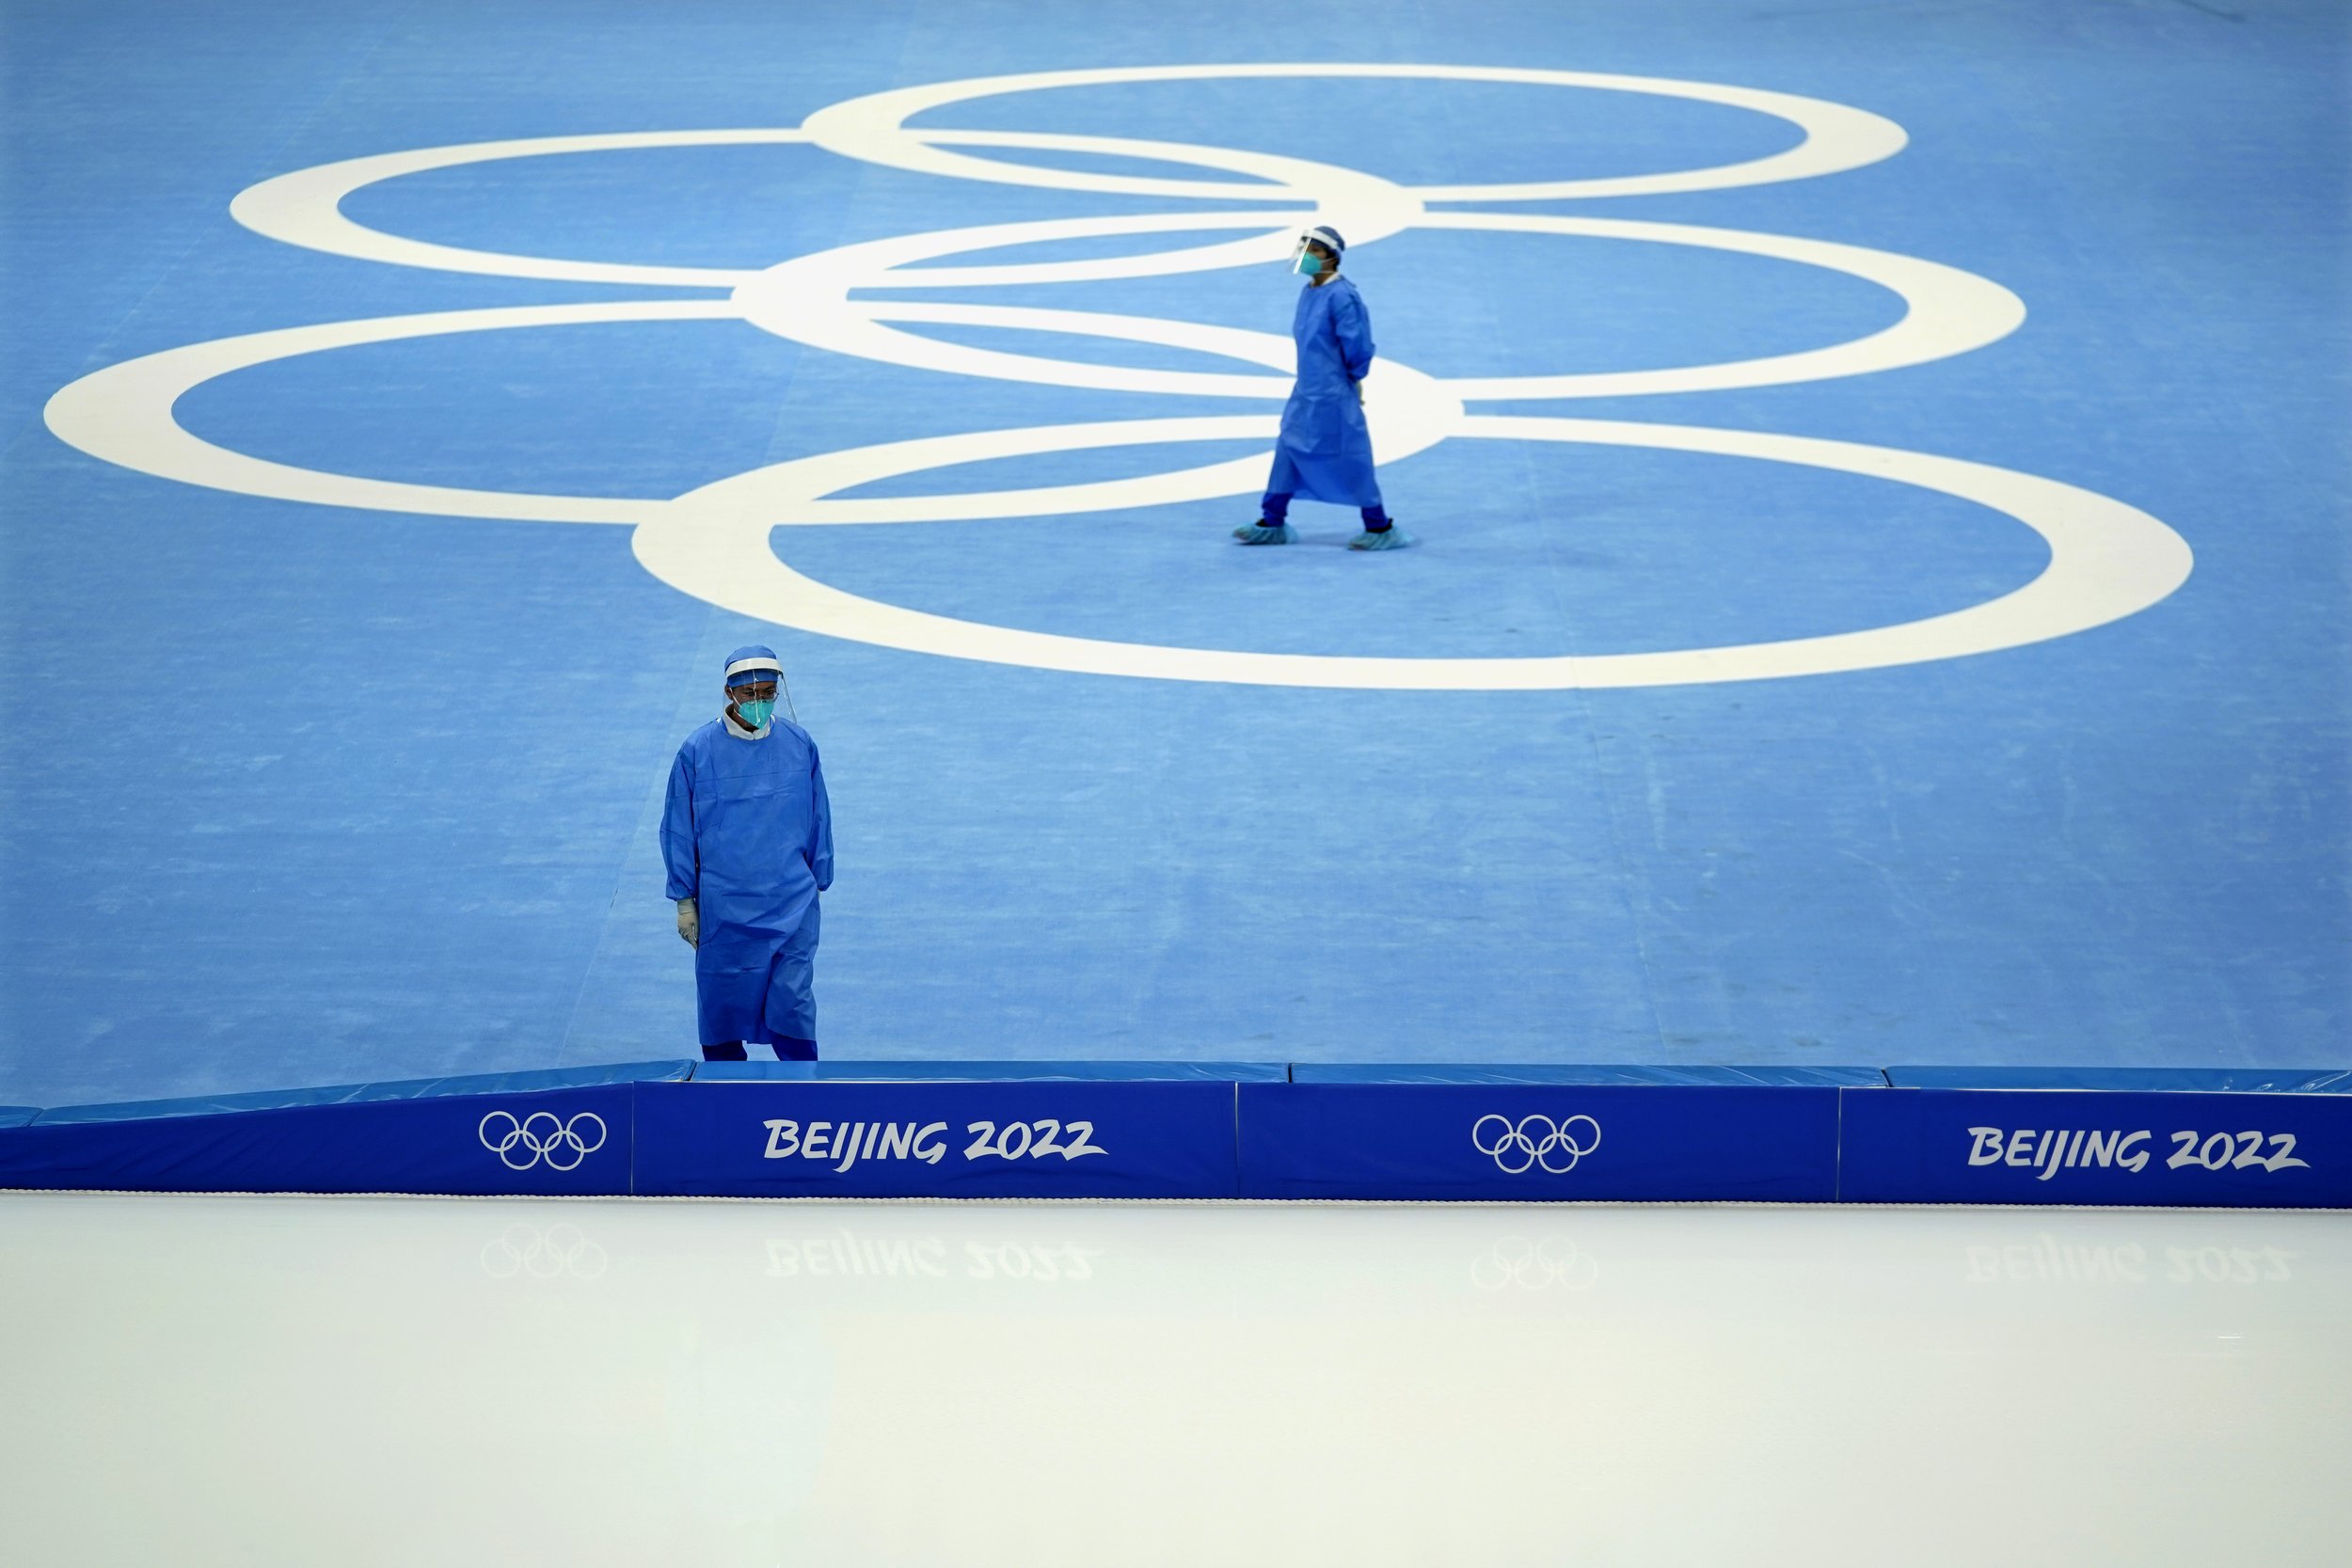  Medical personnel stand ready for activity during a scheduled speedskating practice session inside at the National Speed Skating Oval the 2022 Winter Olympics, Thursday, Jan. 27, 2022, in Beijing. (AP Photo/Jeff Roberson) 